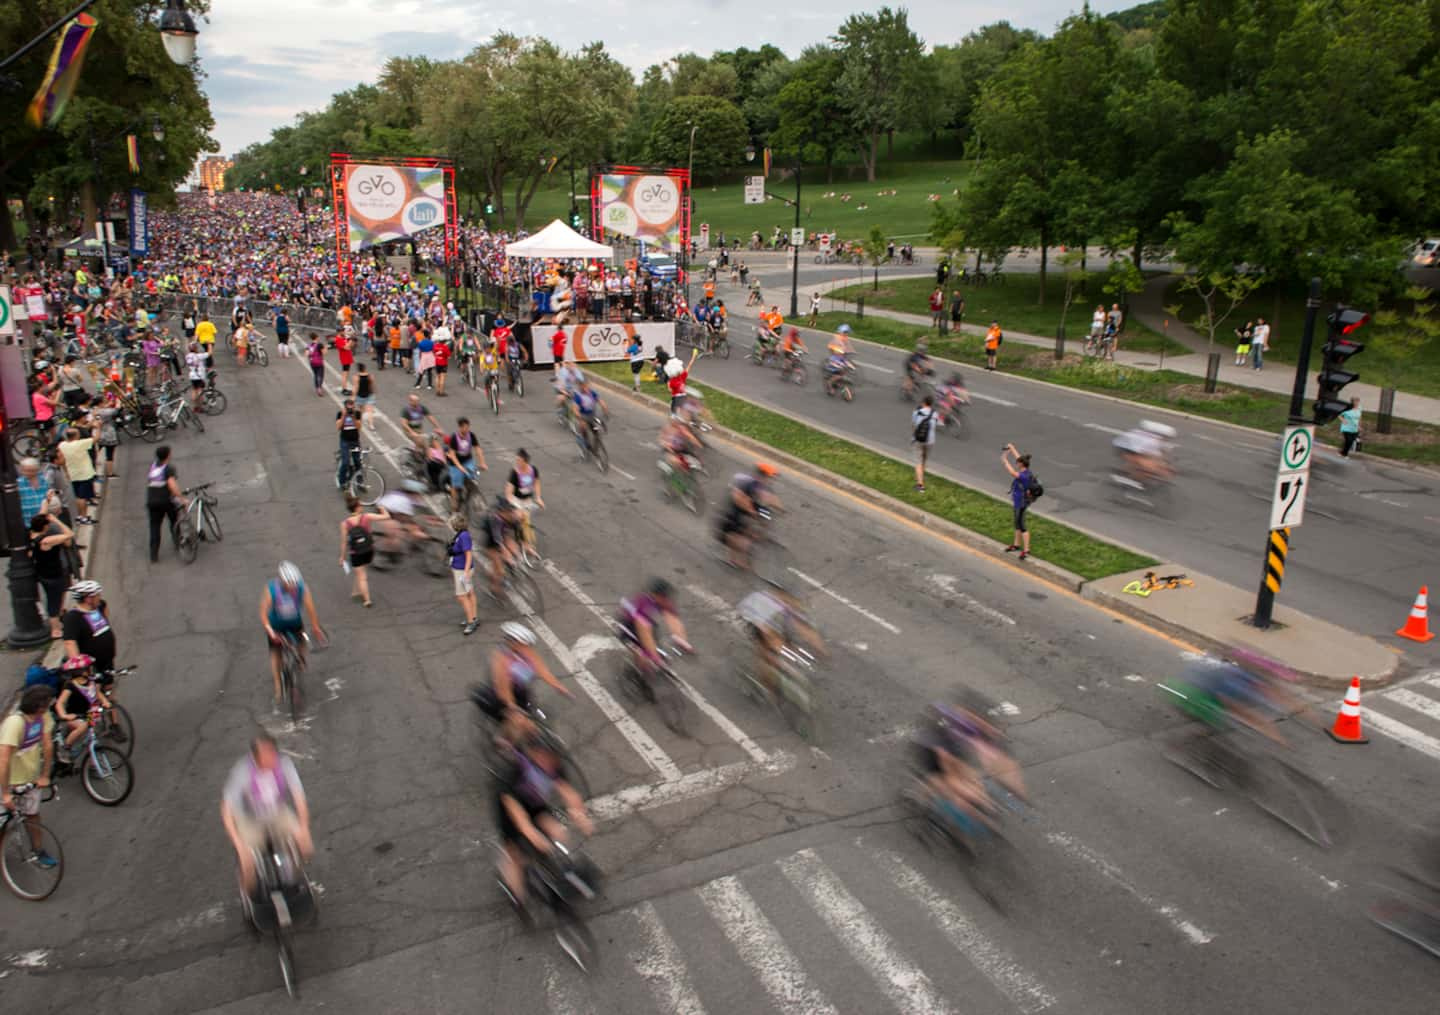 The Go Bike Montreal Festival is back on Sunday